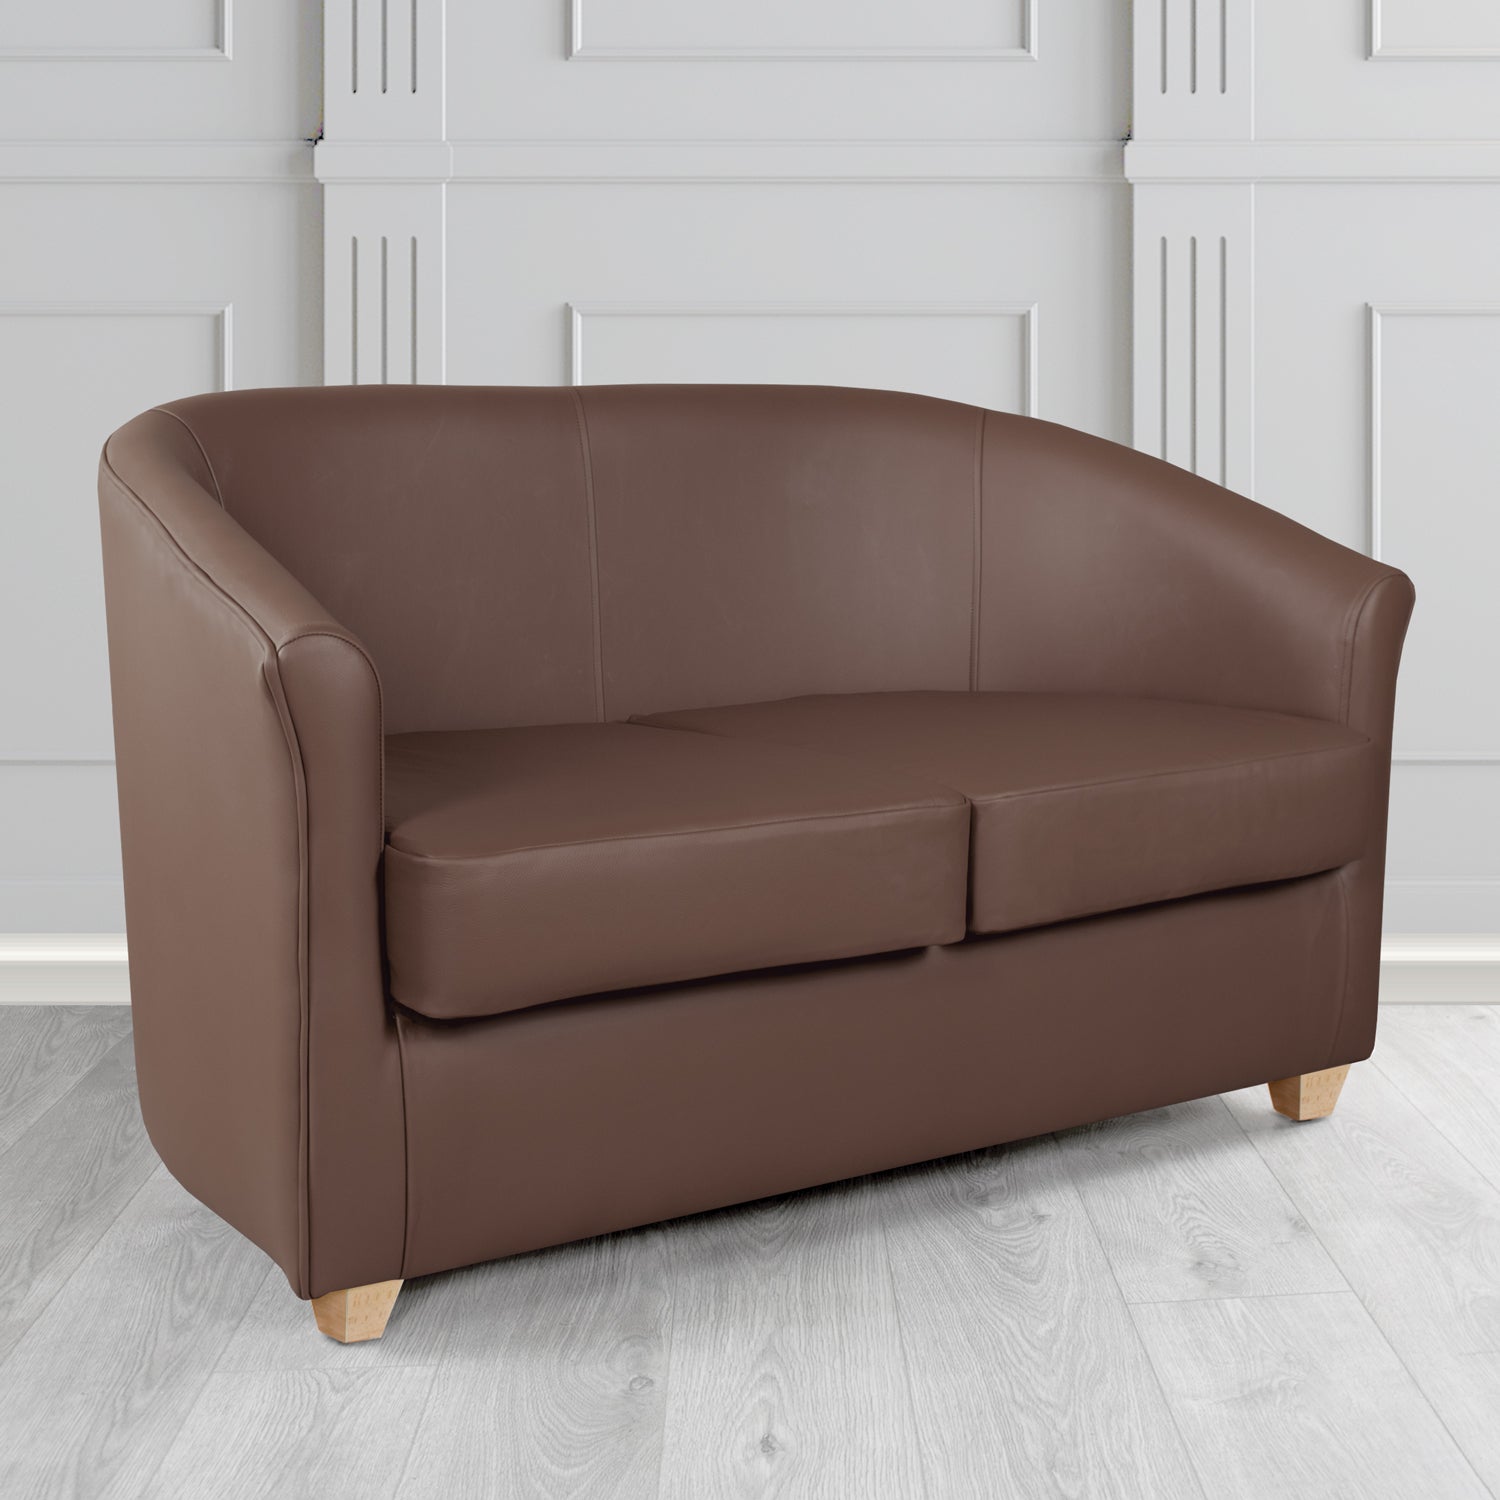 Cannes 2 Seater Tub Sofa in Just Colour Cocoa Crib 5 Faux Leather - The Tub Chair Shop